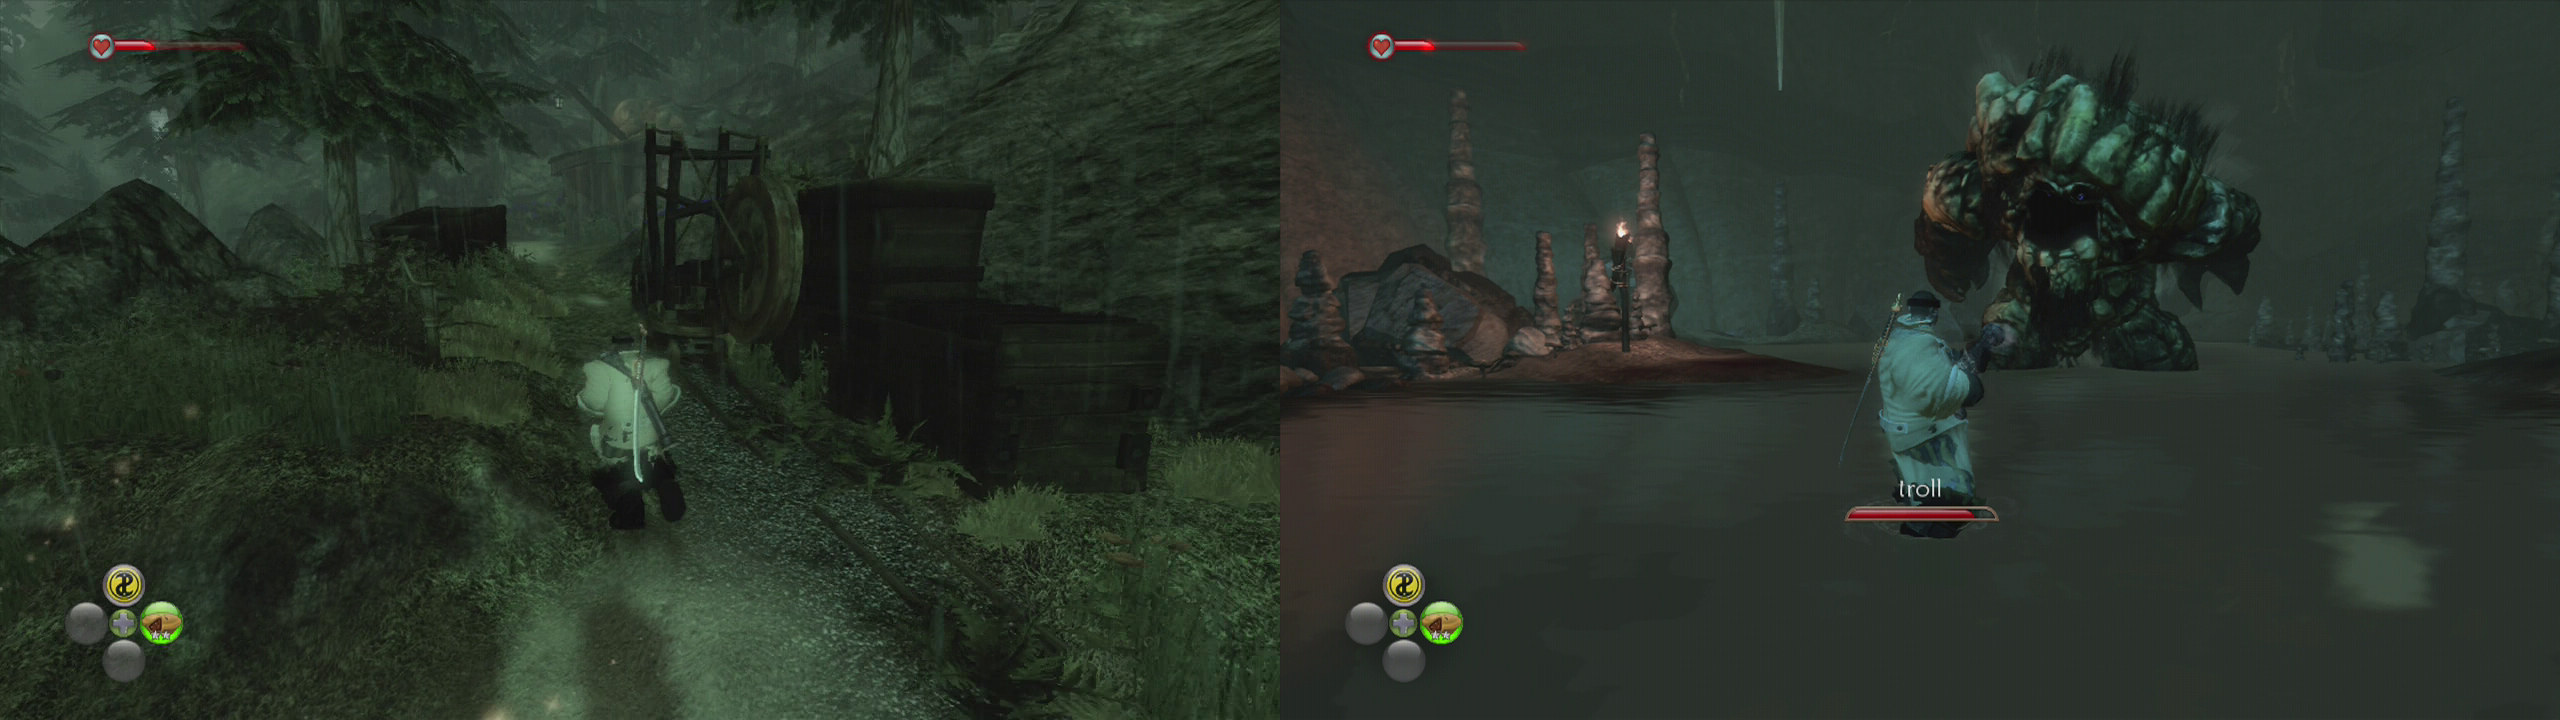 Find the mine shaft near the train tracks (left) and kill the troll inside (right).